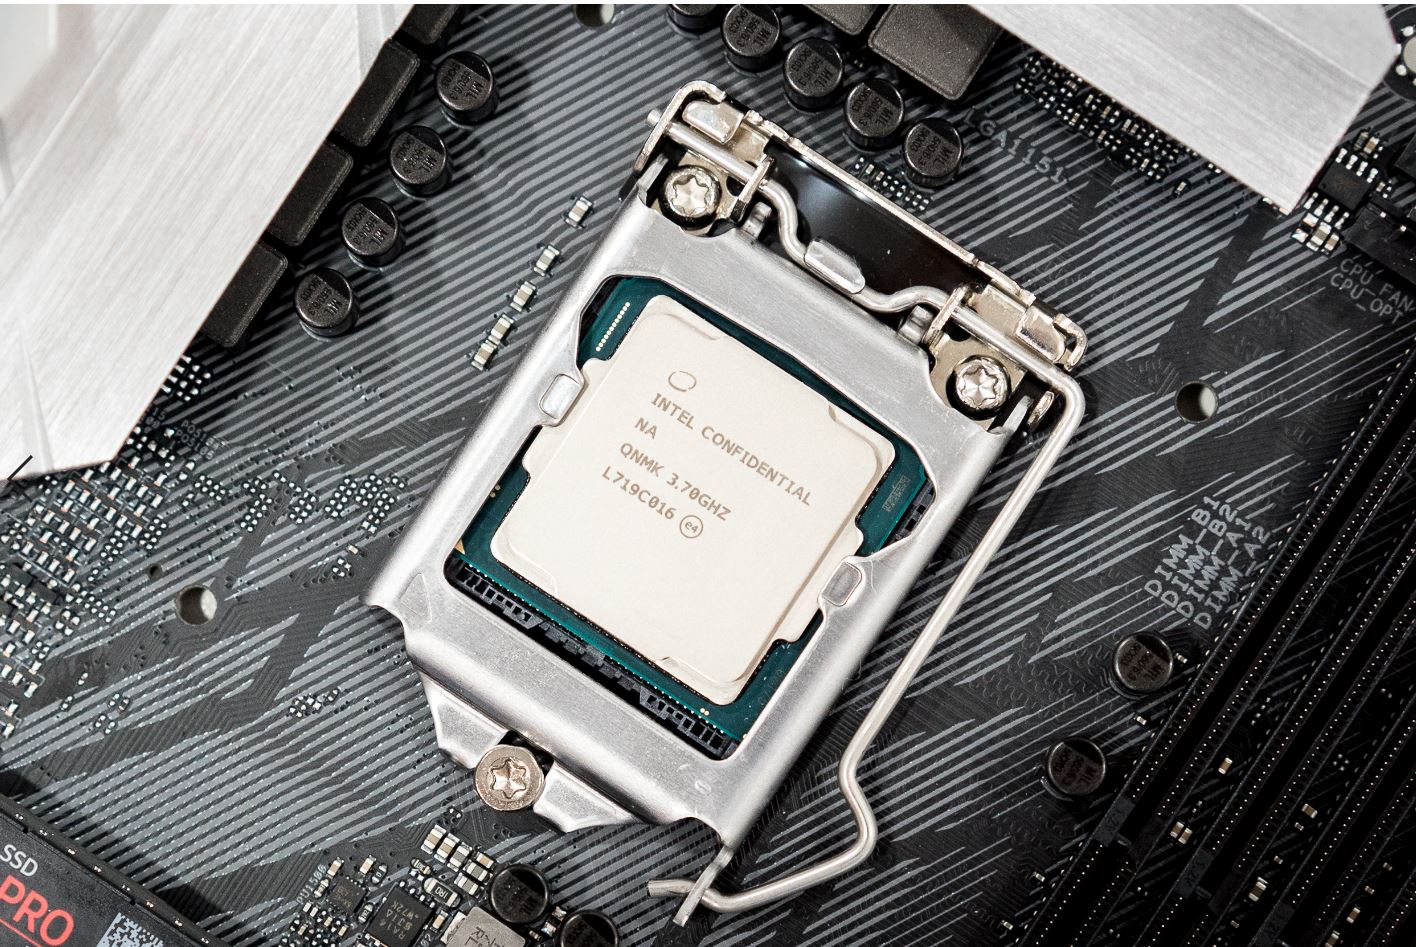 The 8700k is a great high-end gaming CPU